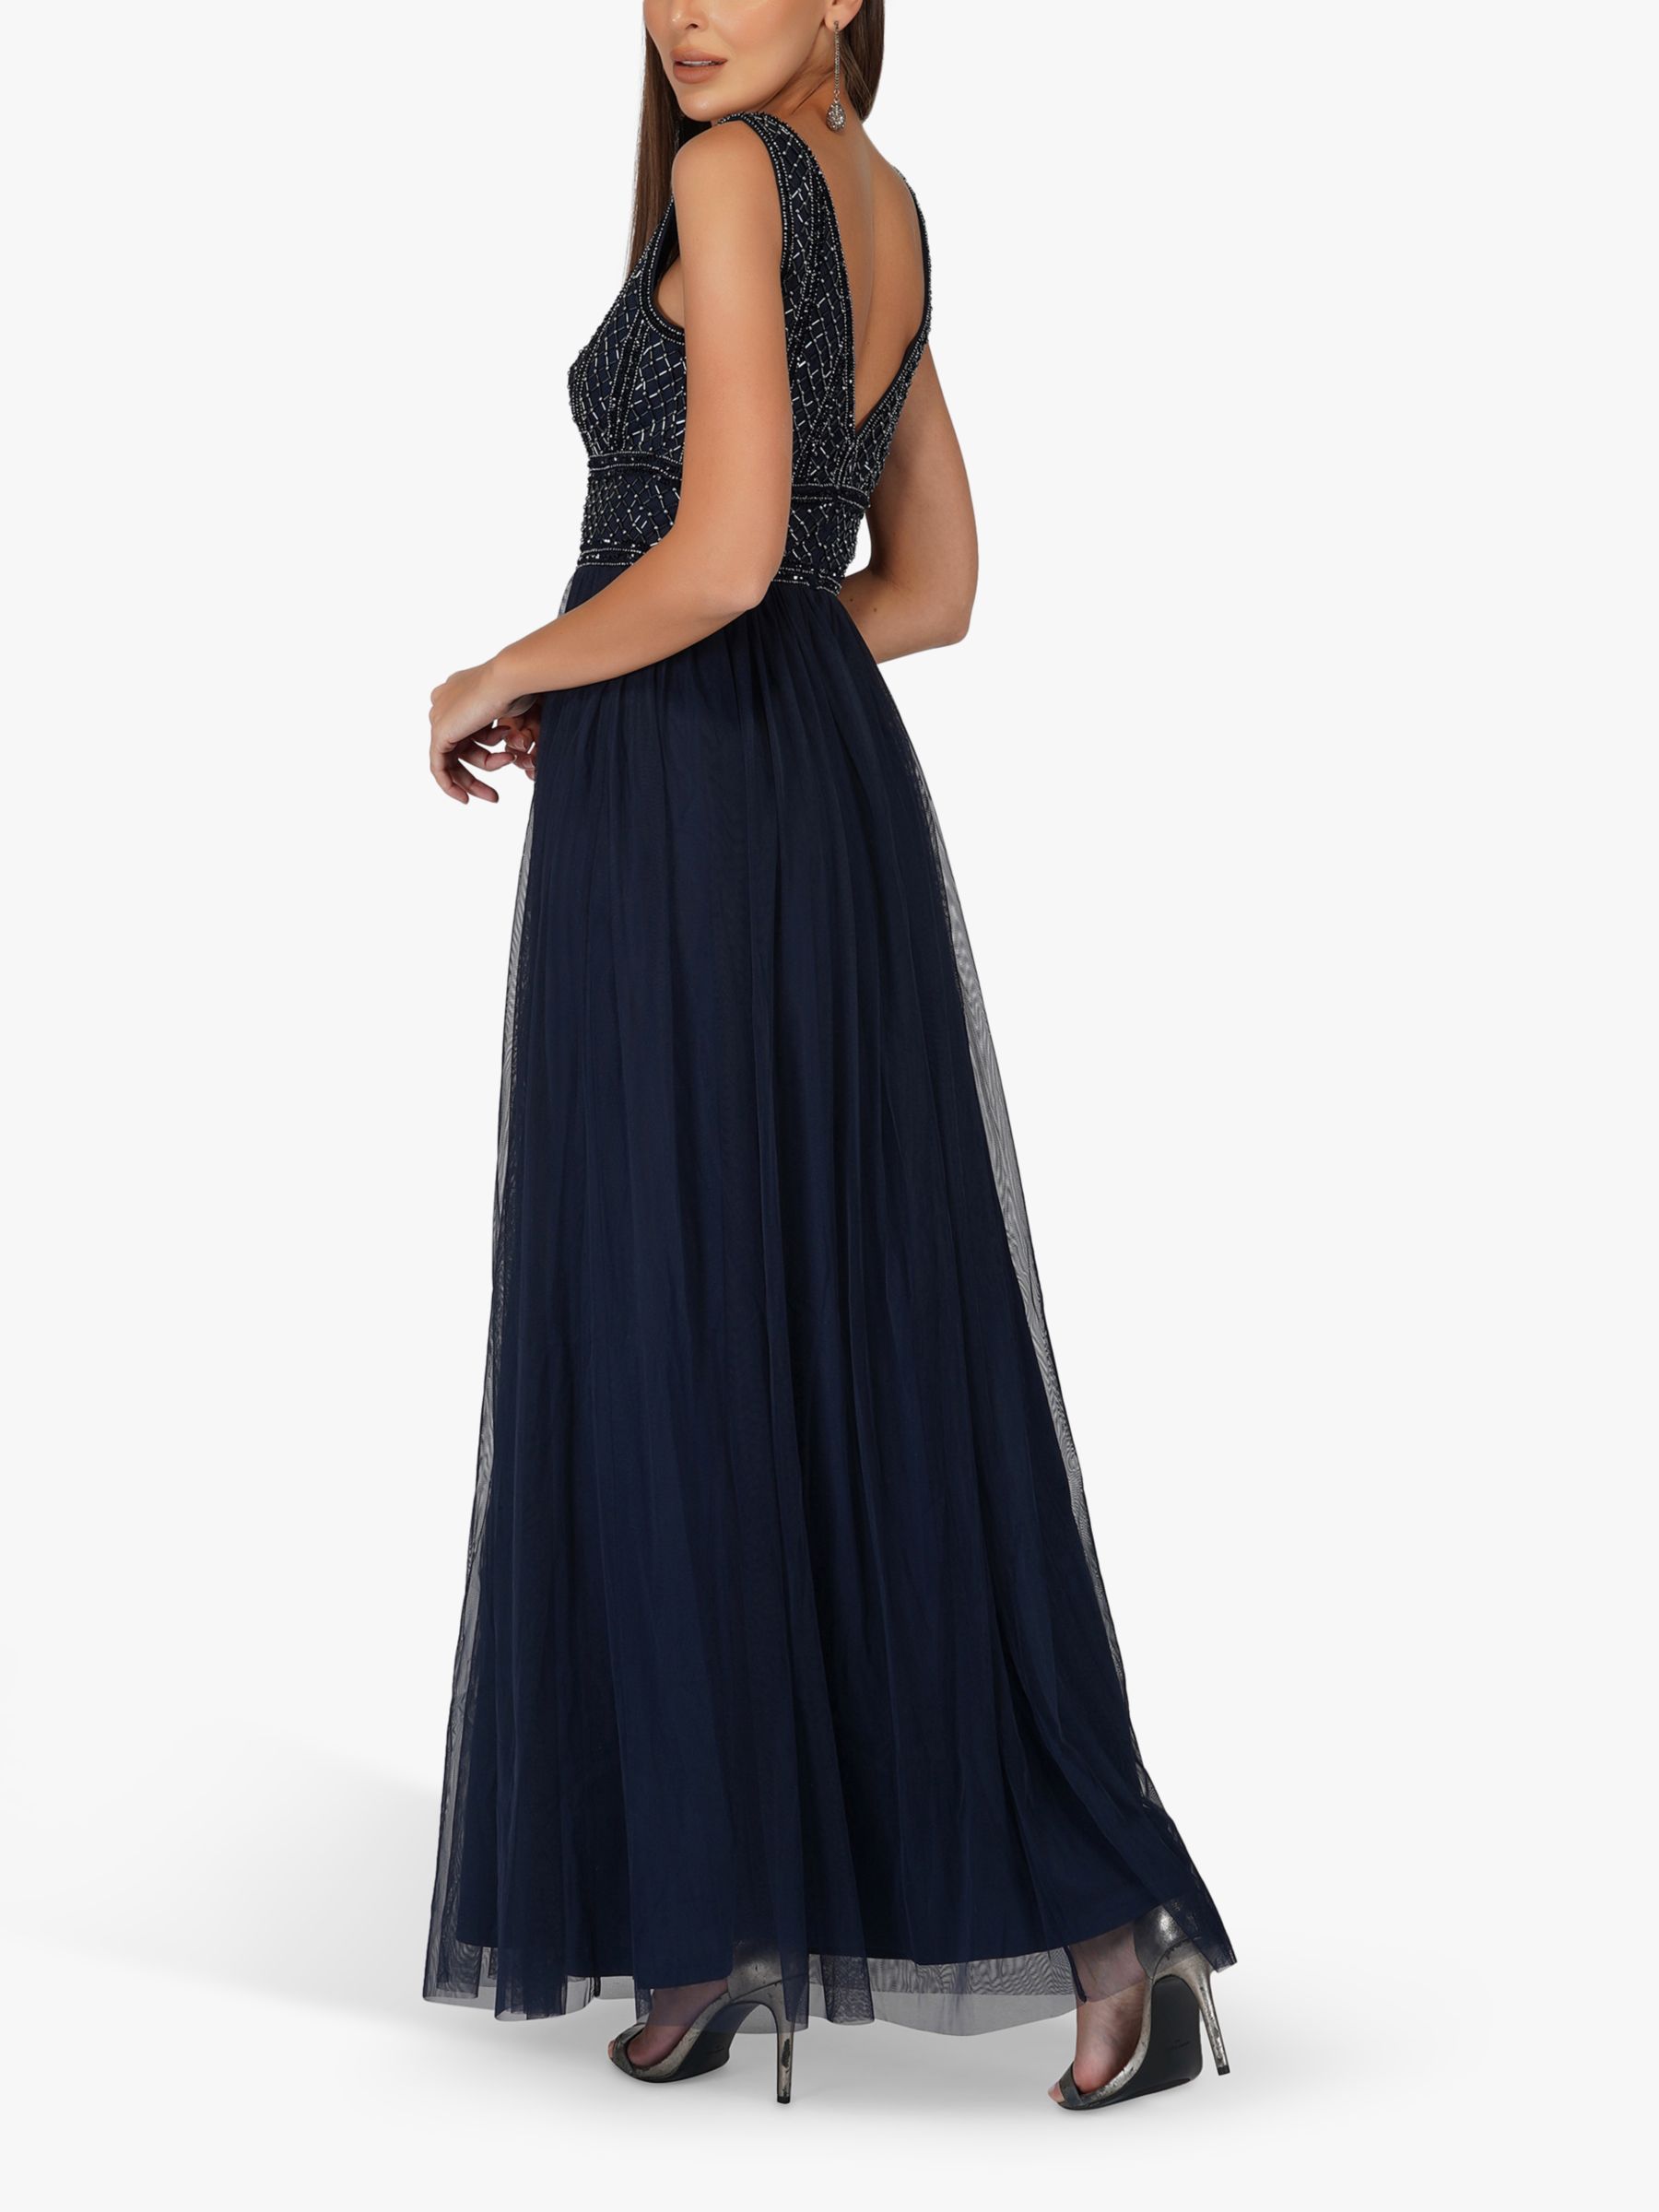 Buy Lace & Beads New Mulan Maxi Online at johnlewis.com